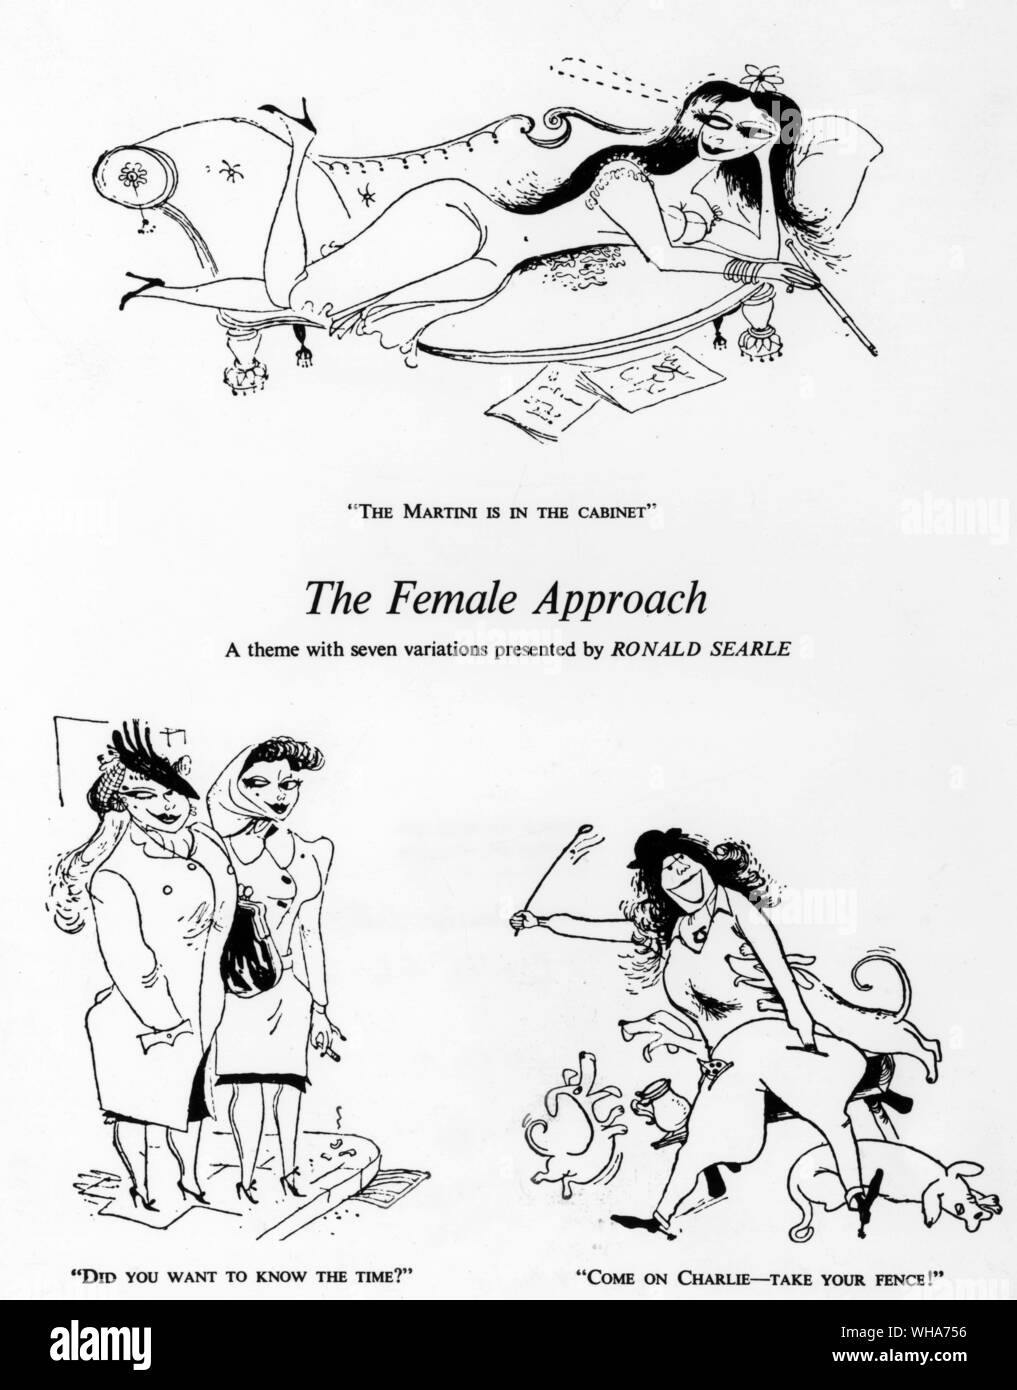 Ronald Searle from The Female Approach ? Stock Photo